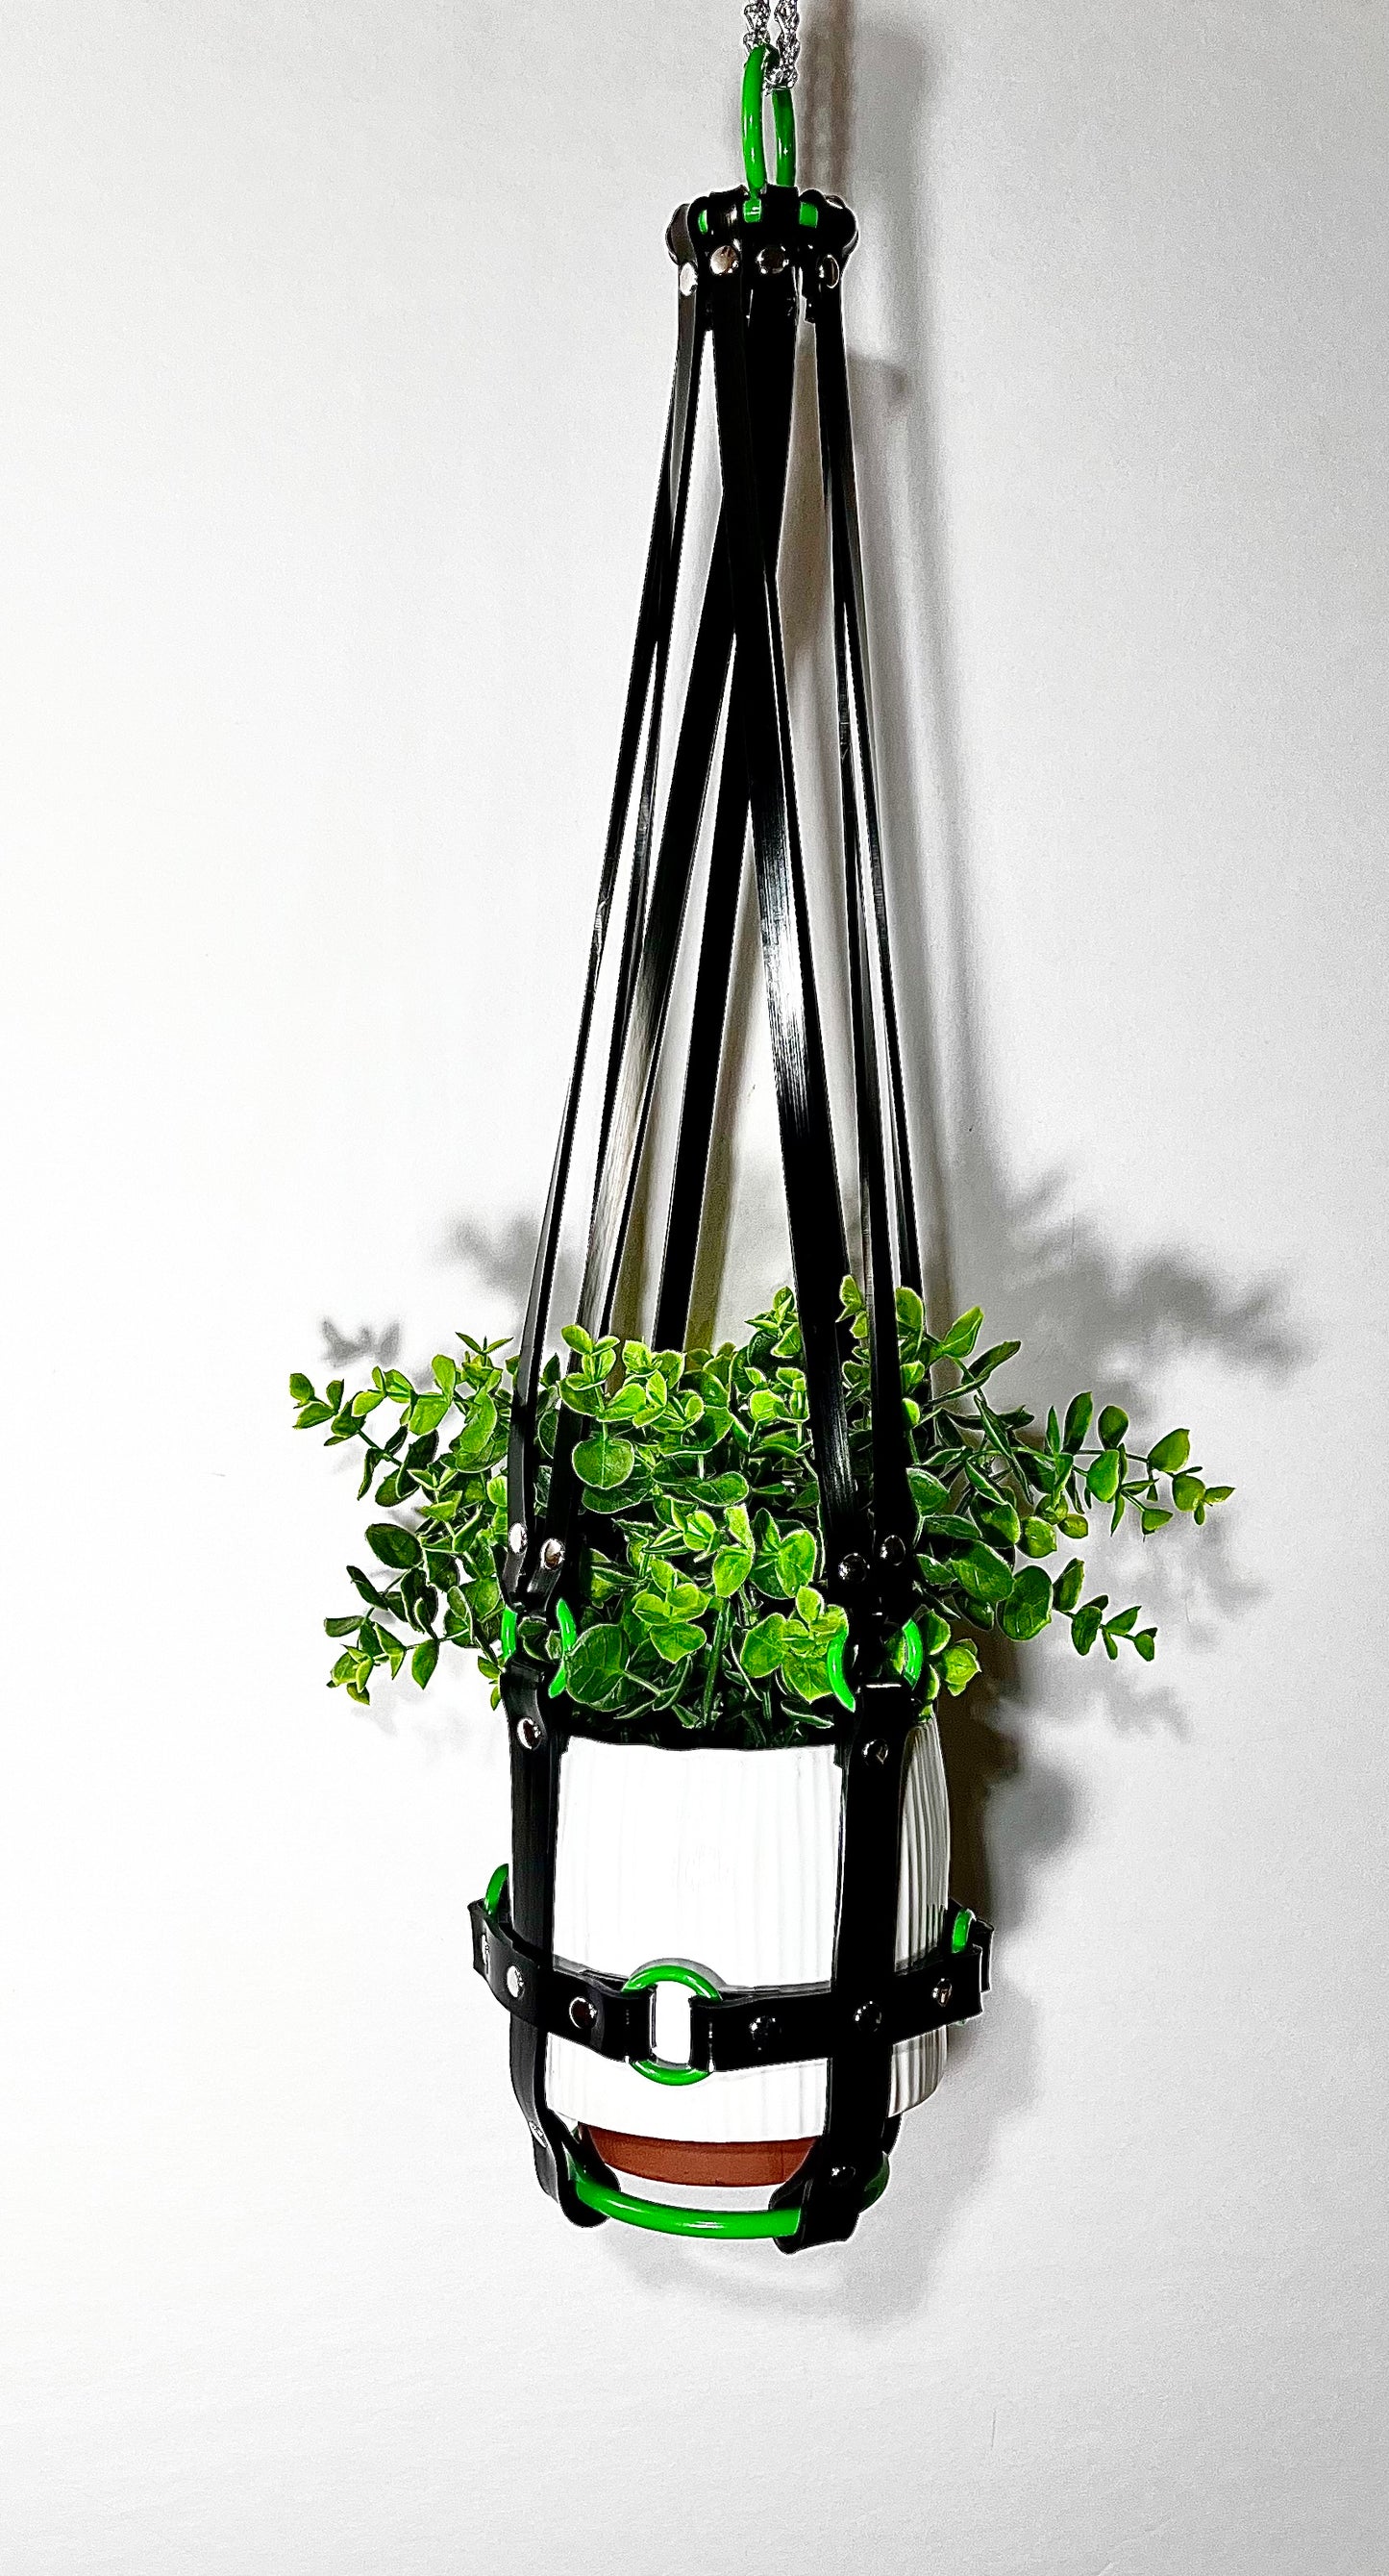 Basic Bitch 6” Plant Hanger with Green rings